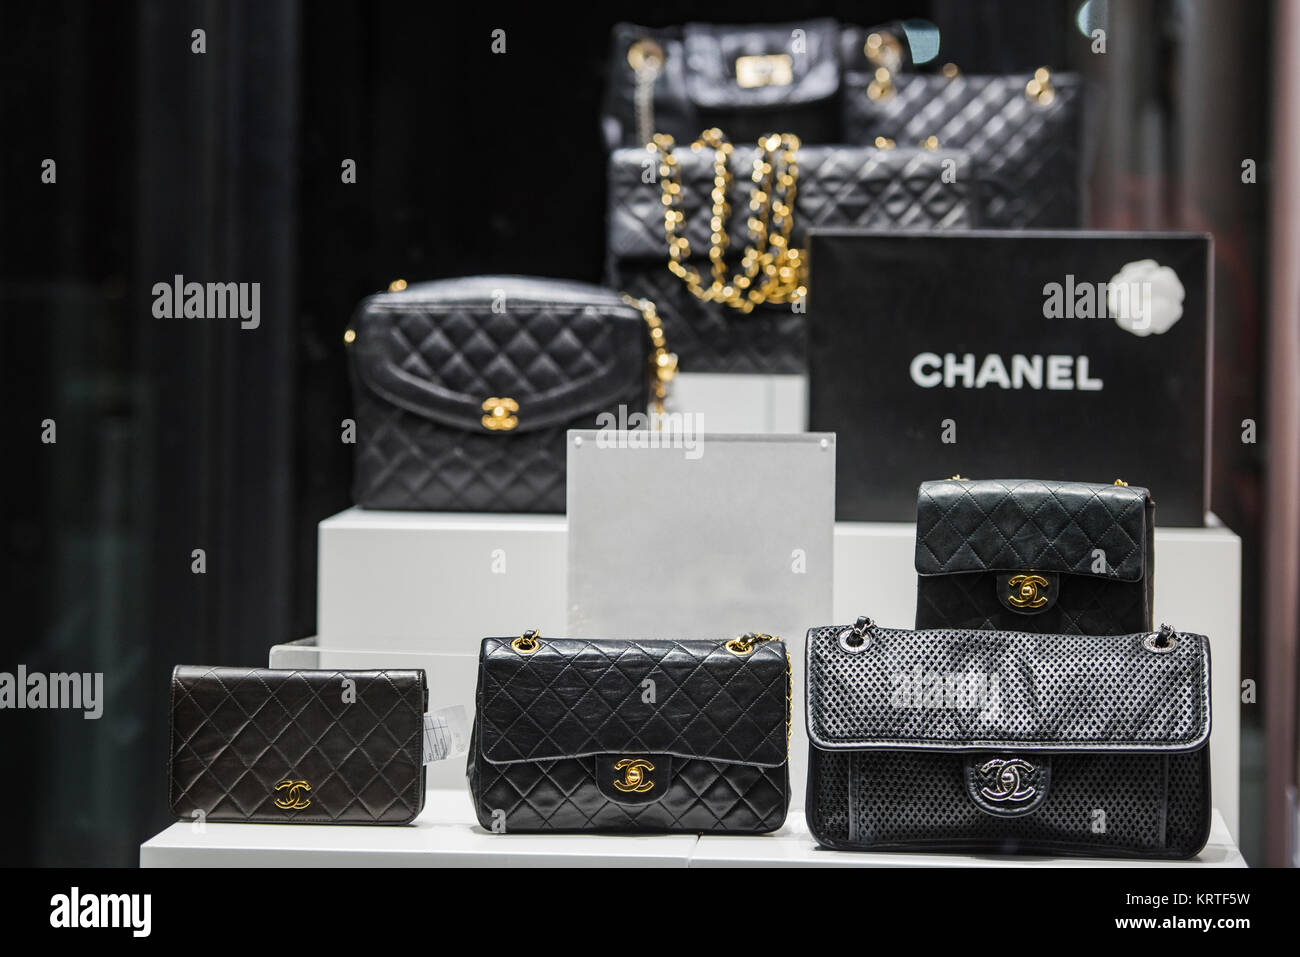 London, UK - February 19, 2017: Chanel purses in a store front in London  Stock Photo - Alamy